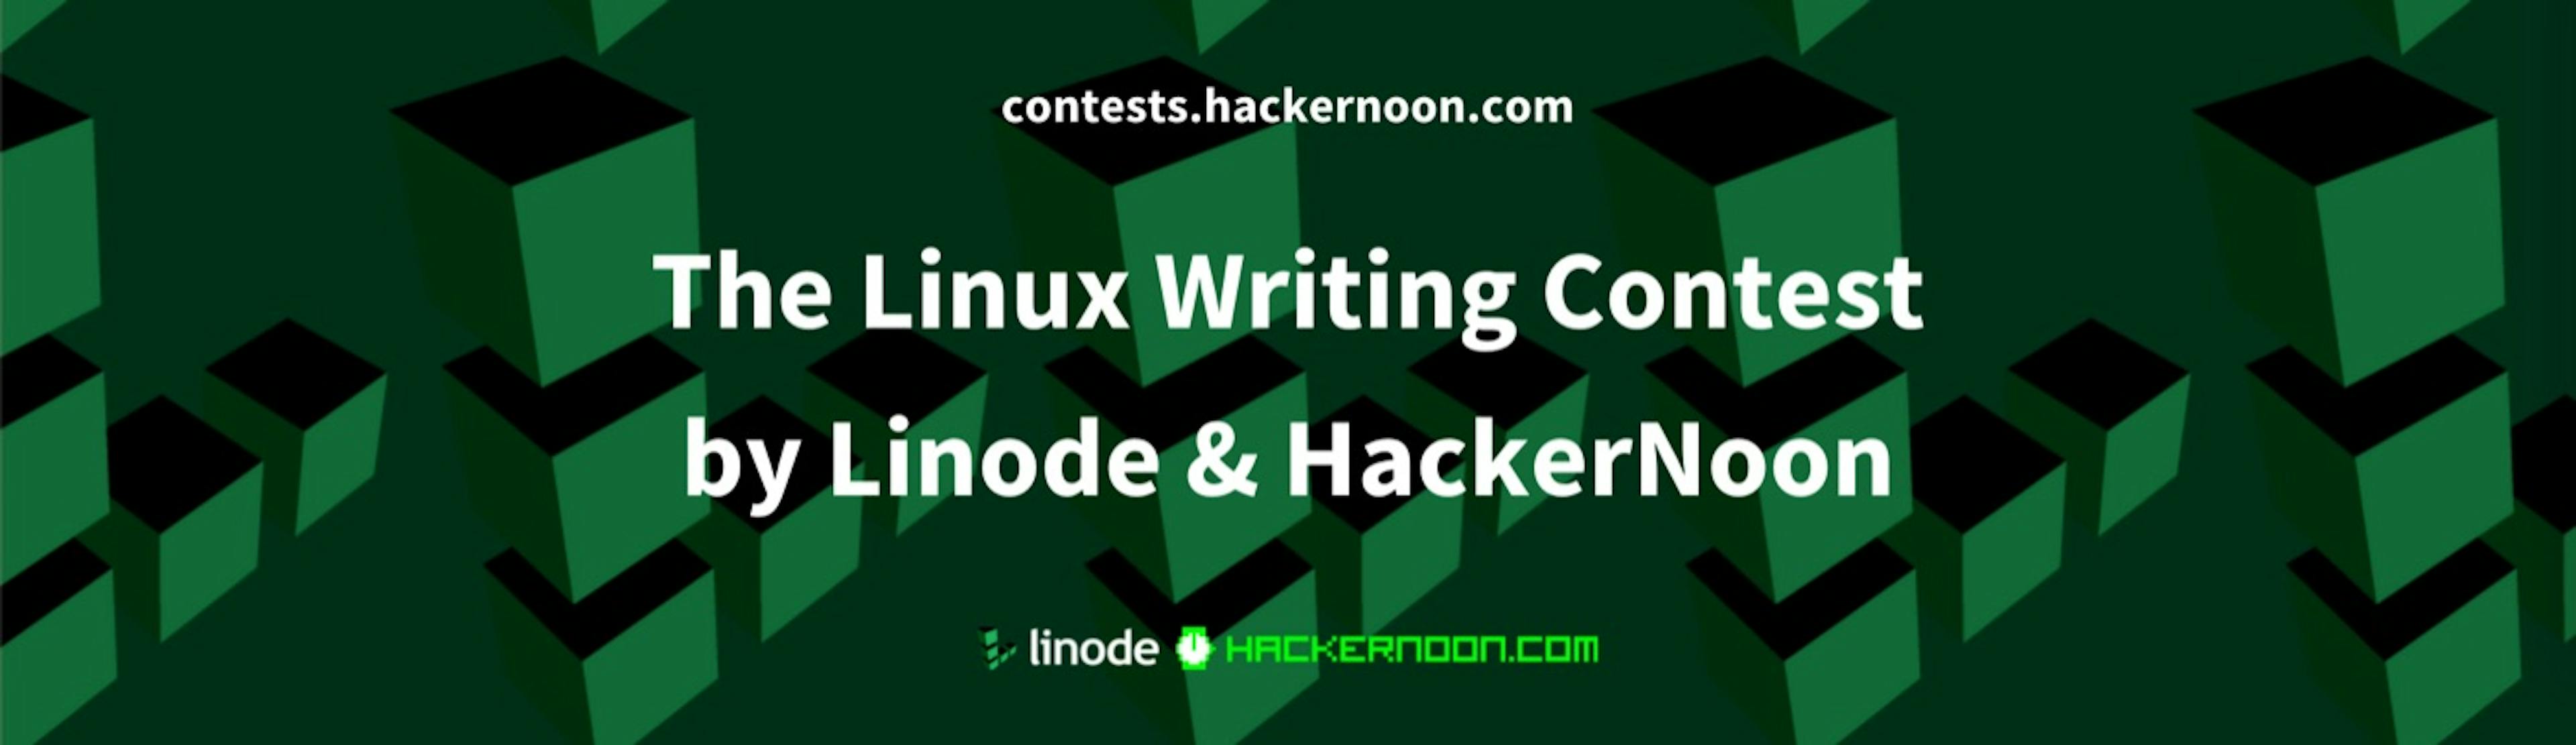 featured image - Calling All Linux Lovers: Answer These Simple Questions to Win from $3,000!